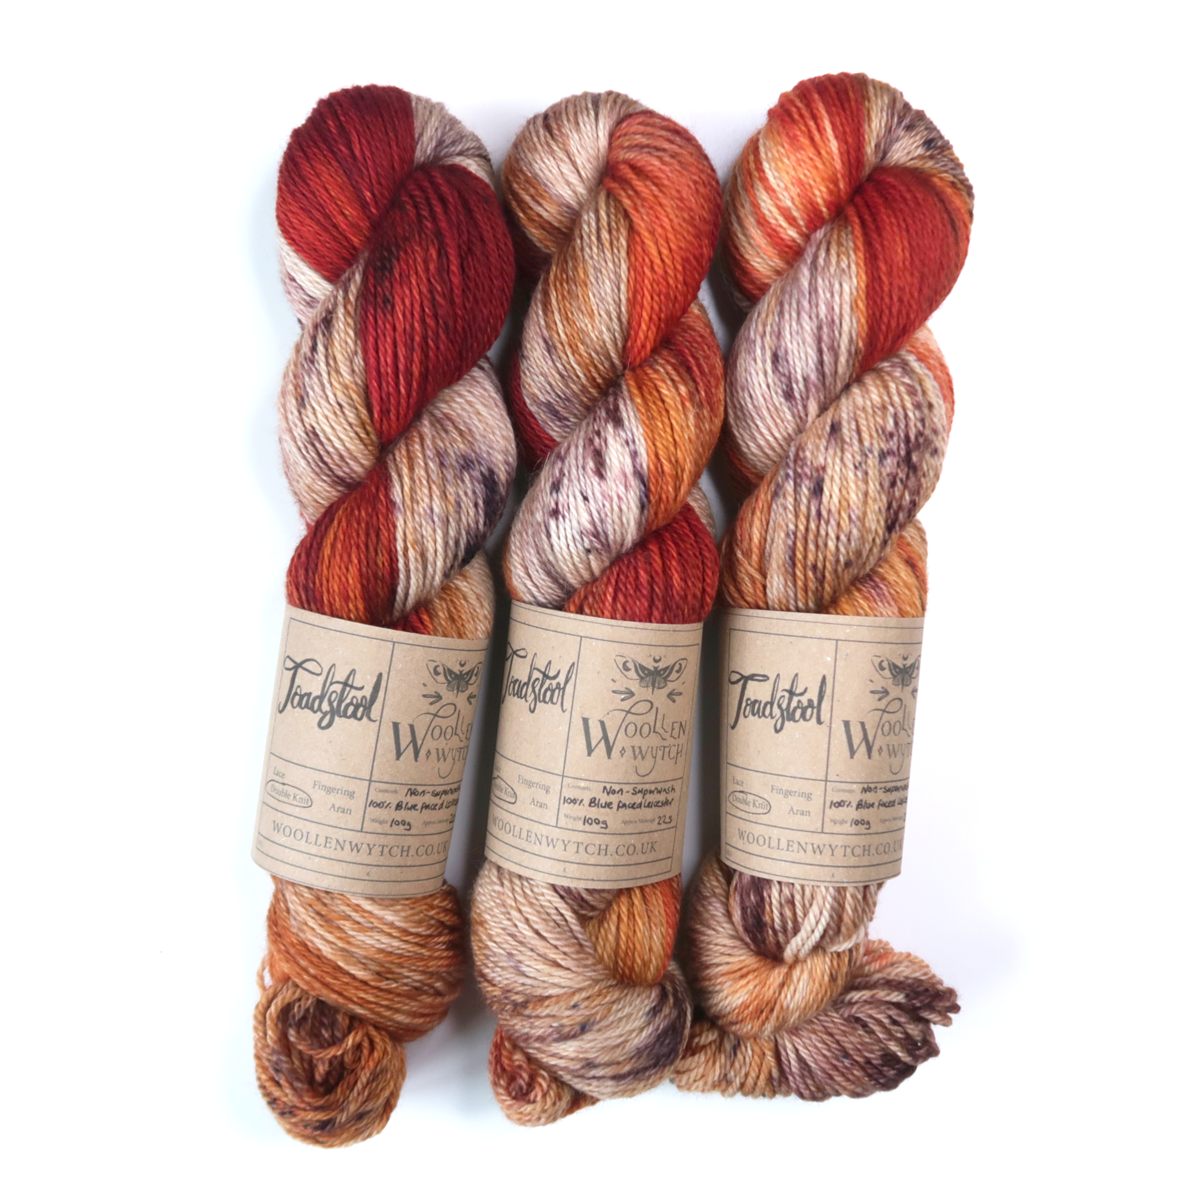 Creamy browns with vibrant reds and oranges hand dyed dk double knit yarn by Woollen Wytch in Bristol using 100% british wool